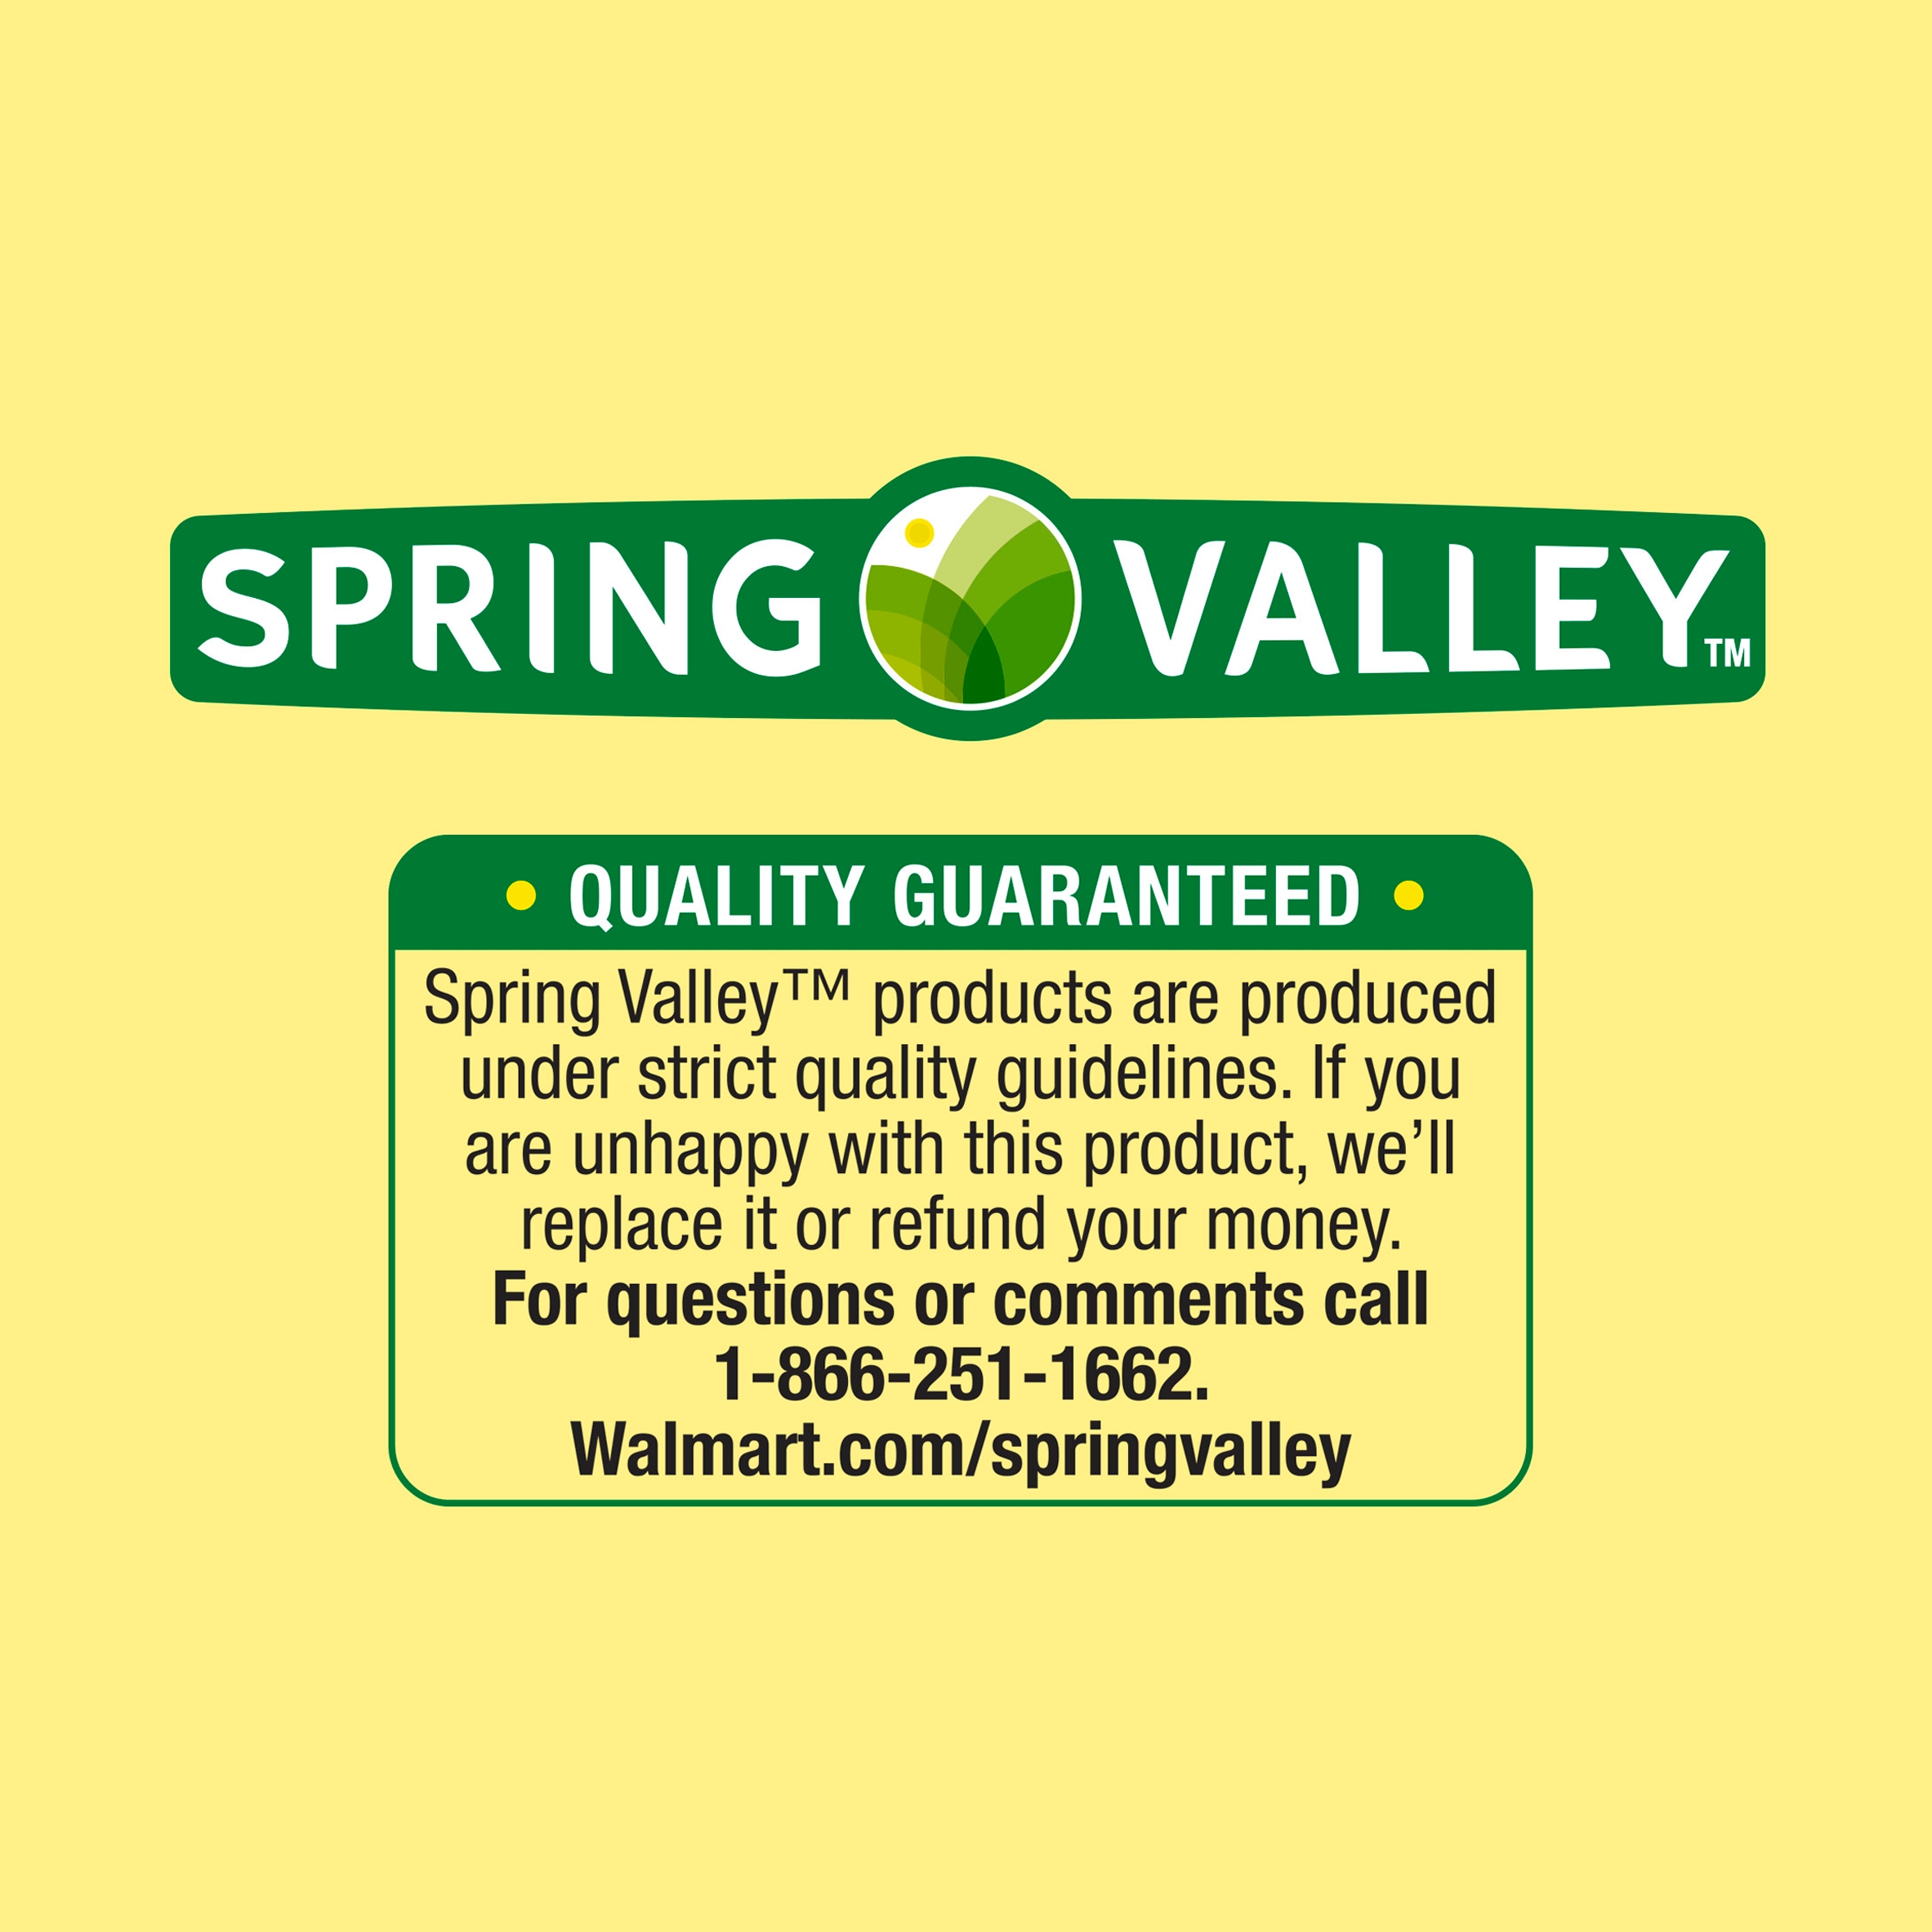 Spring Valley Rapid-Release Calcium Dietary Supplement, 600 mg, 150 Count - image 5 of 9